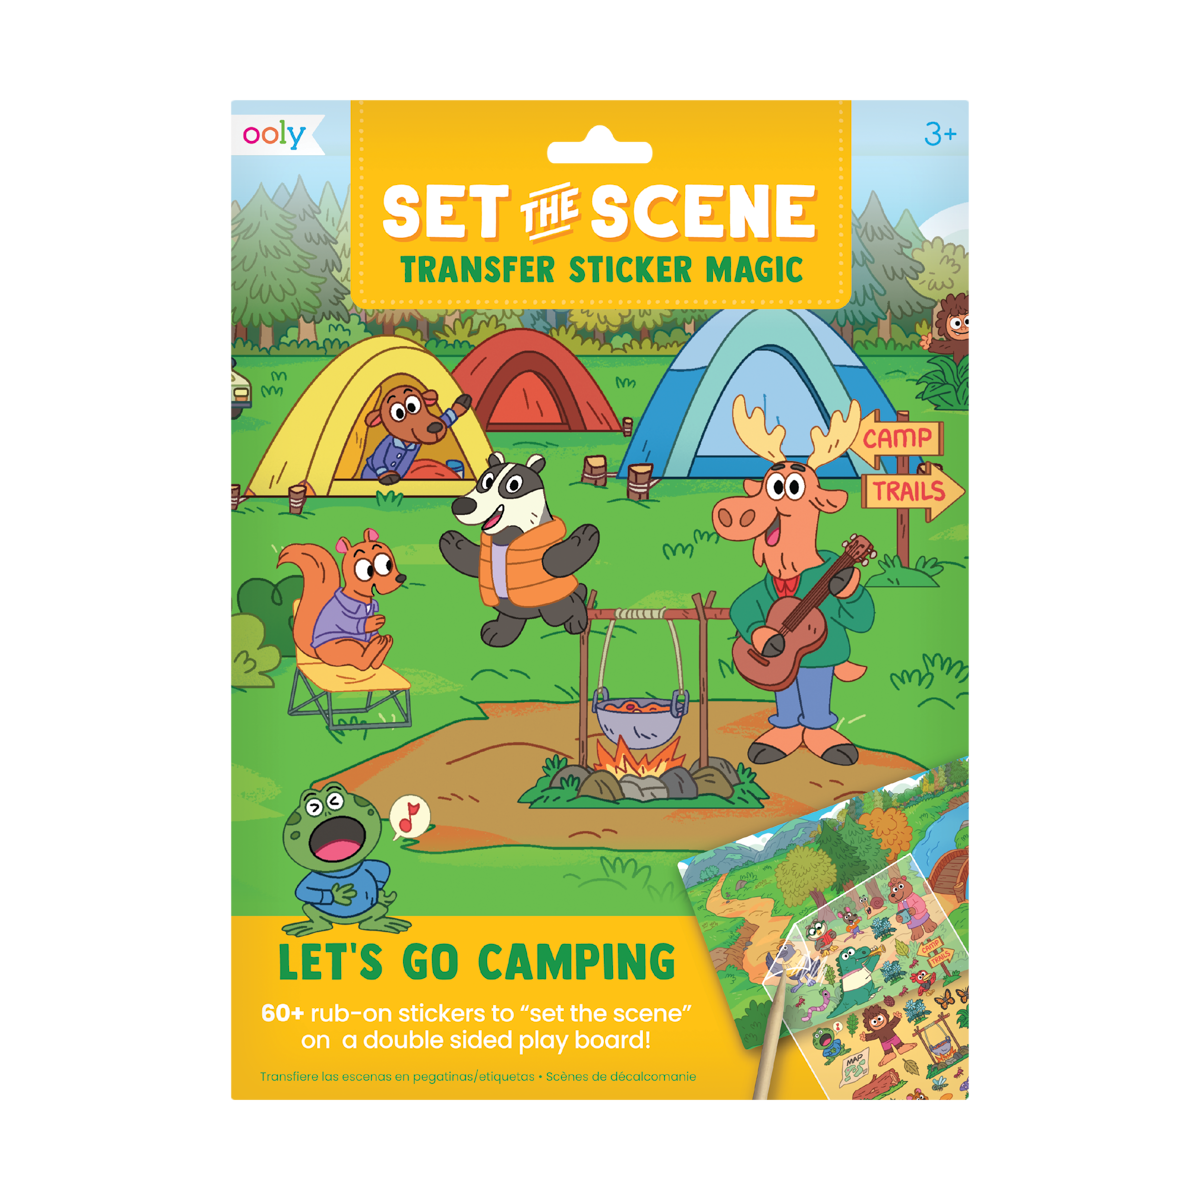 OOLY Set The Scene Transfer Stickers Magic - Let's Go Camping in packaging